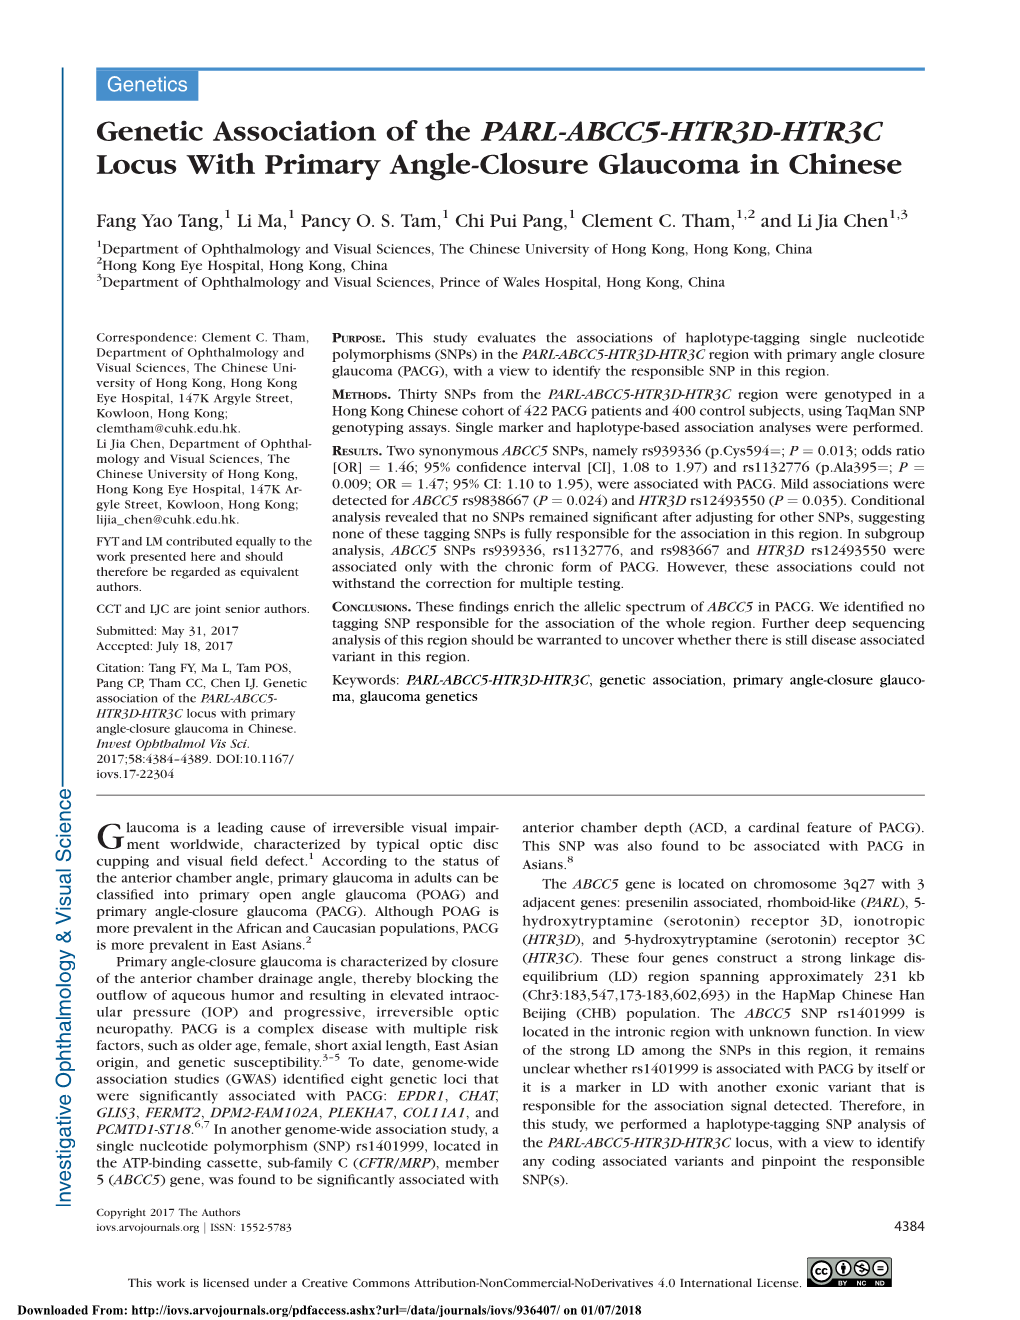 Genetic Association of the PARL-ABCC5-HTR3D-HTR3C Locus with Primary Angle-Closure Glaucoma in Chinese